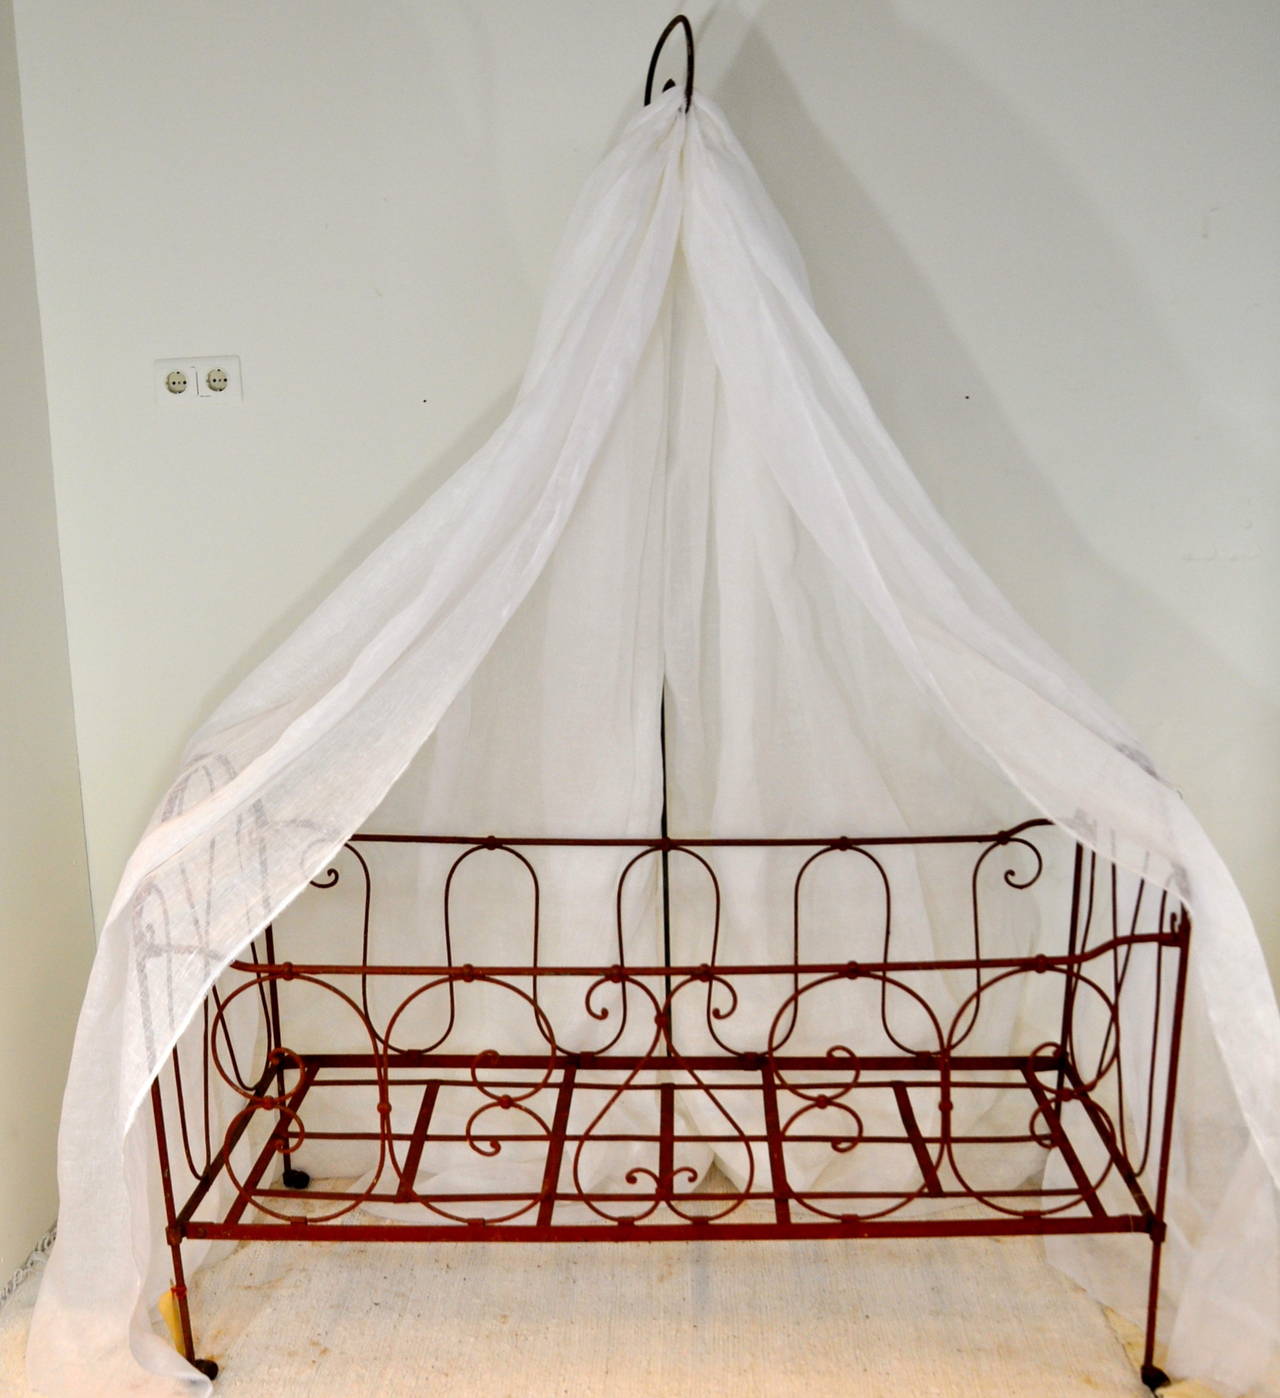 A 19th century French folding baby bed with sky. This baby bed is made in wrought iron with scrolling design and raised on castors. The sky is of a white linen voile and fixed on a beautiful curved Stand. The sky and the Stand are separate and very